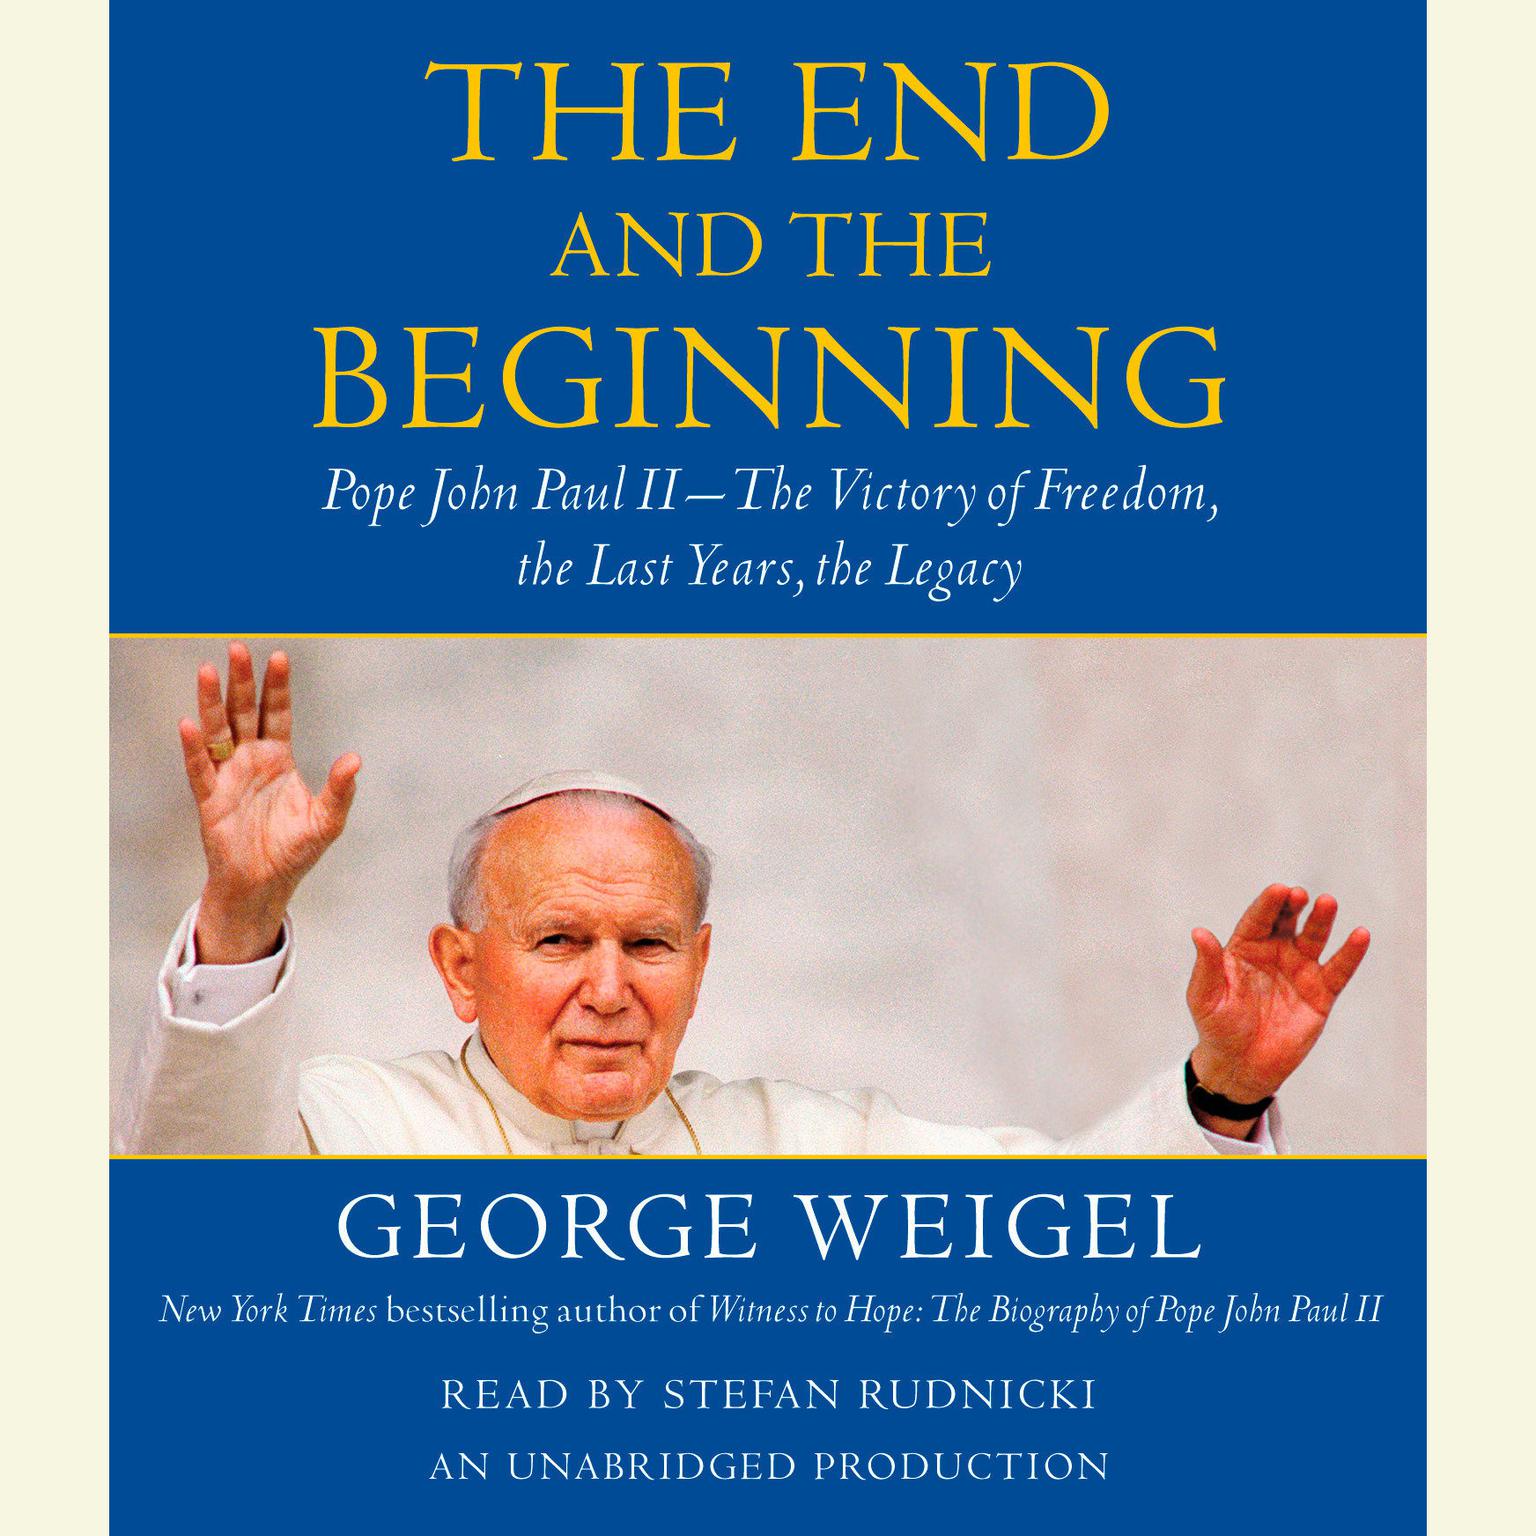 The End and the Beginning: Pope John Paul II -- The Victory of Freedom, the Last Years, the Legacy Audiobook, by George Weigel